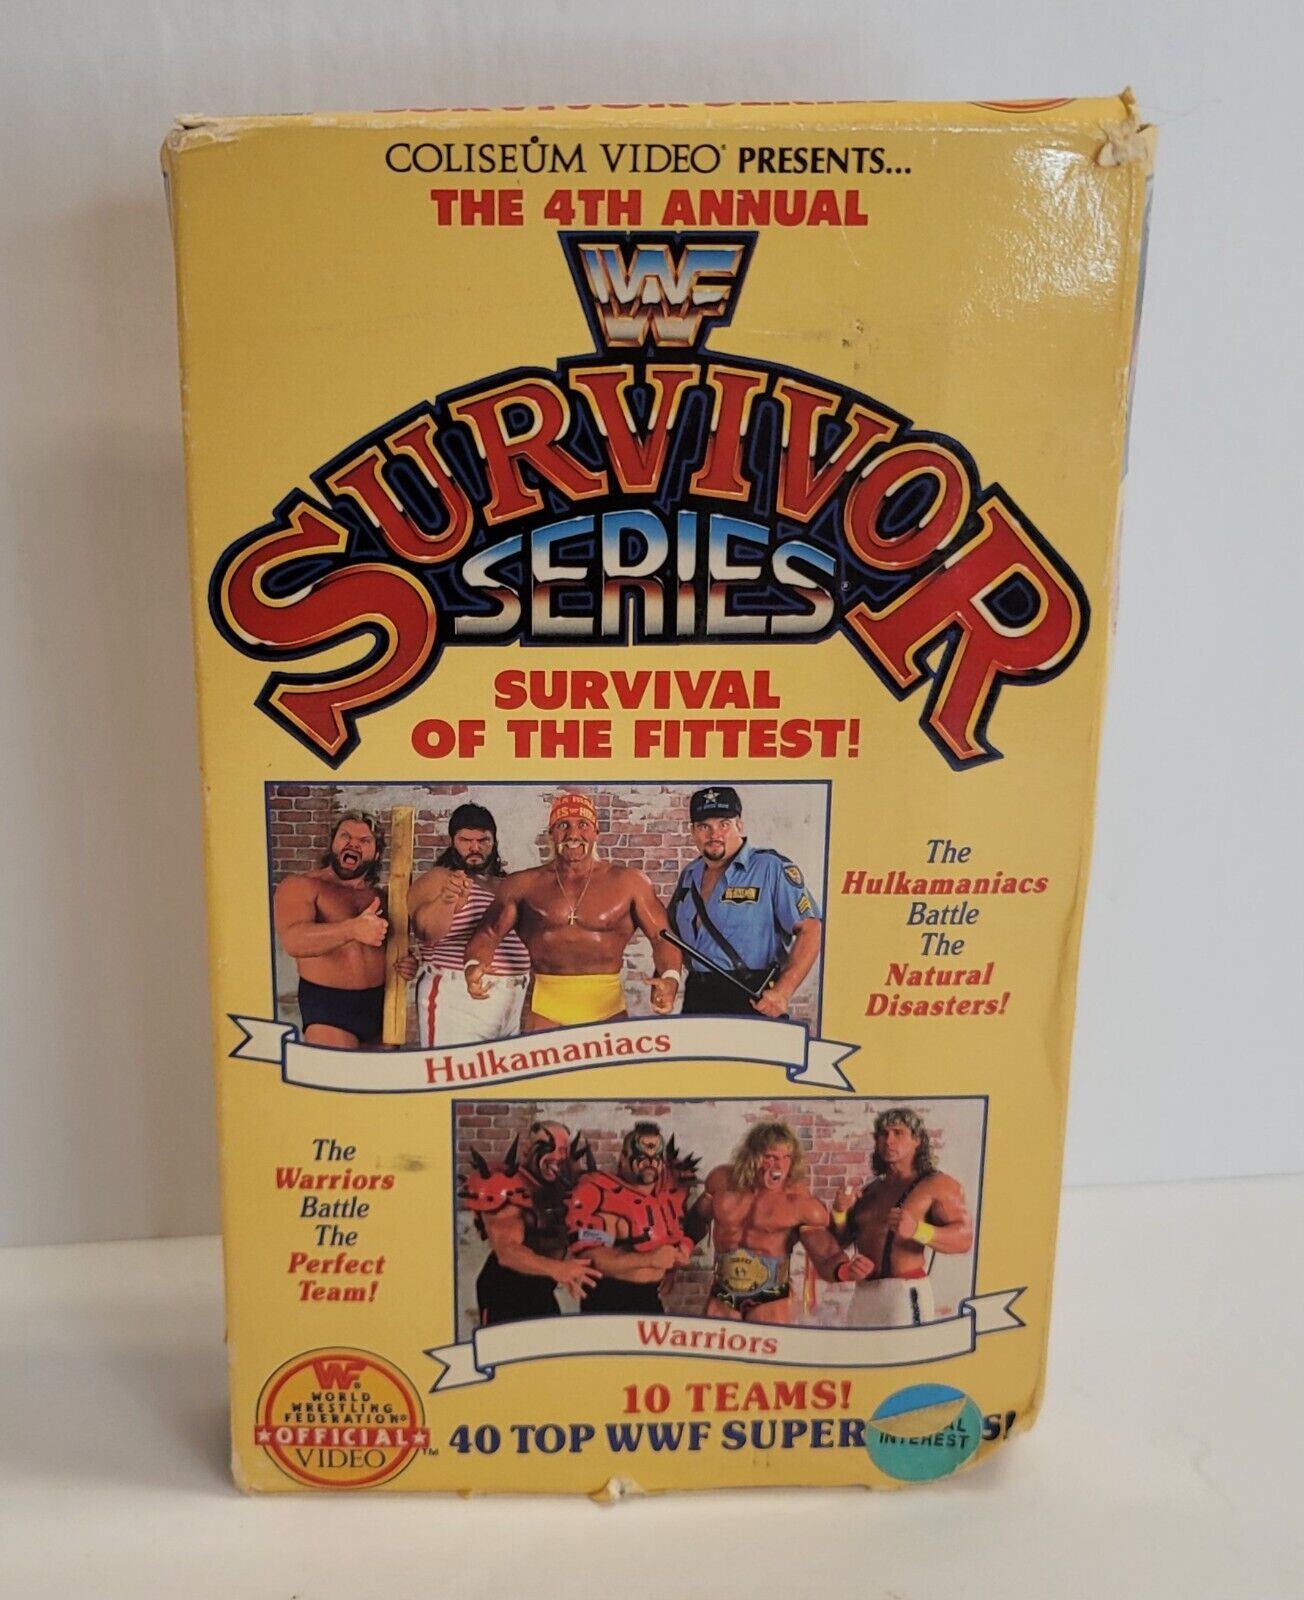 Primary image for WWF Survivor Series VHS 4th Annual Survival of the Fittest 1990 Big Box Hulk Hog